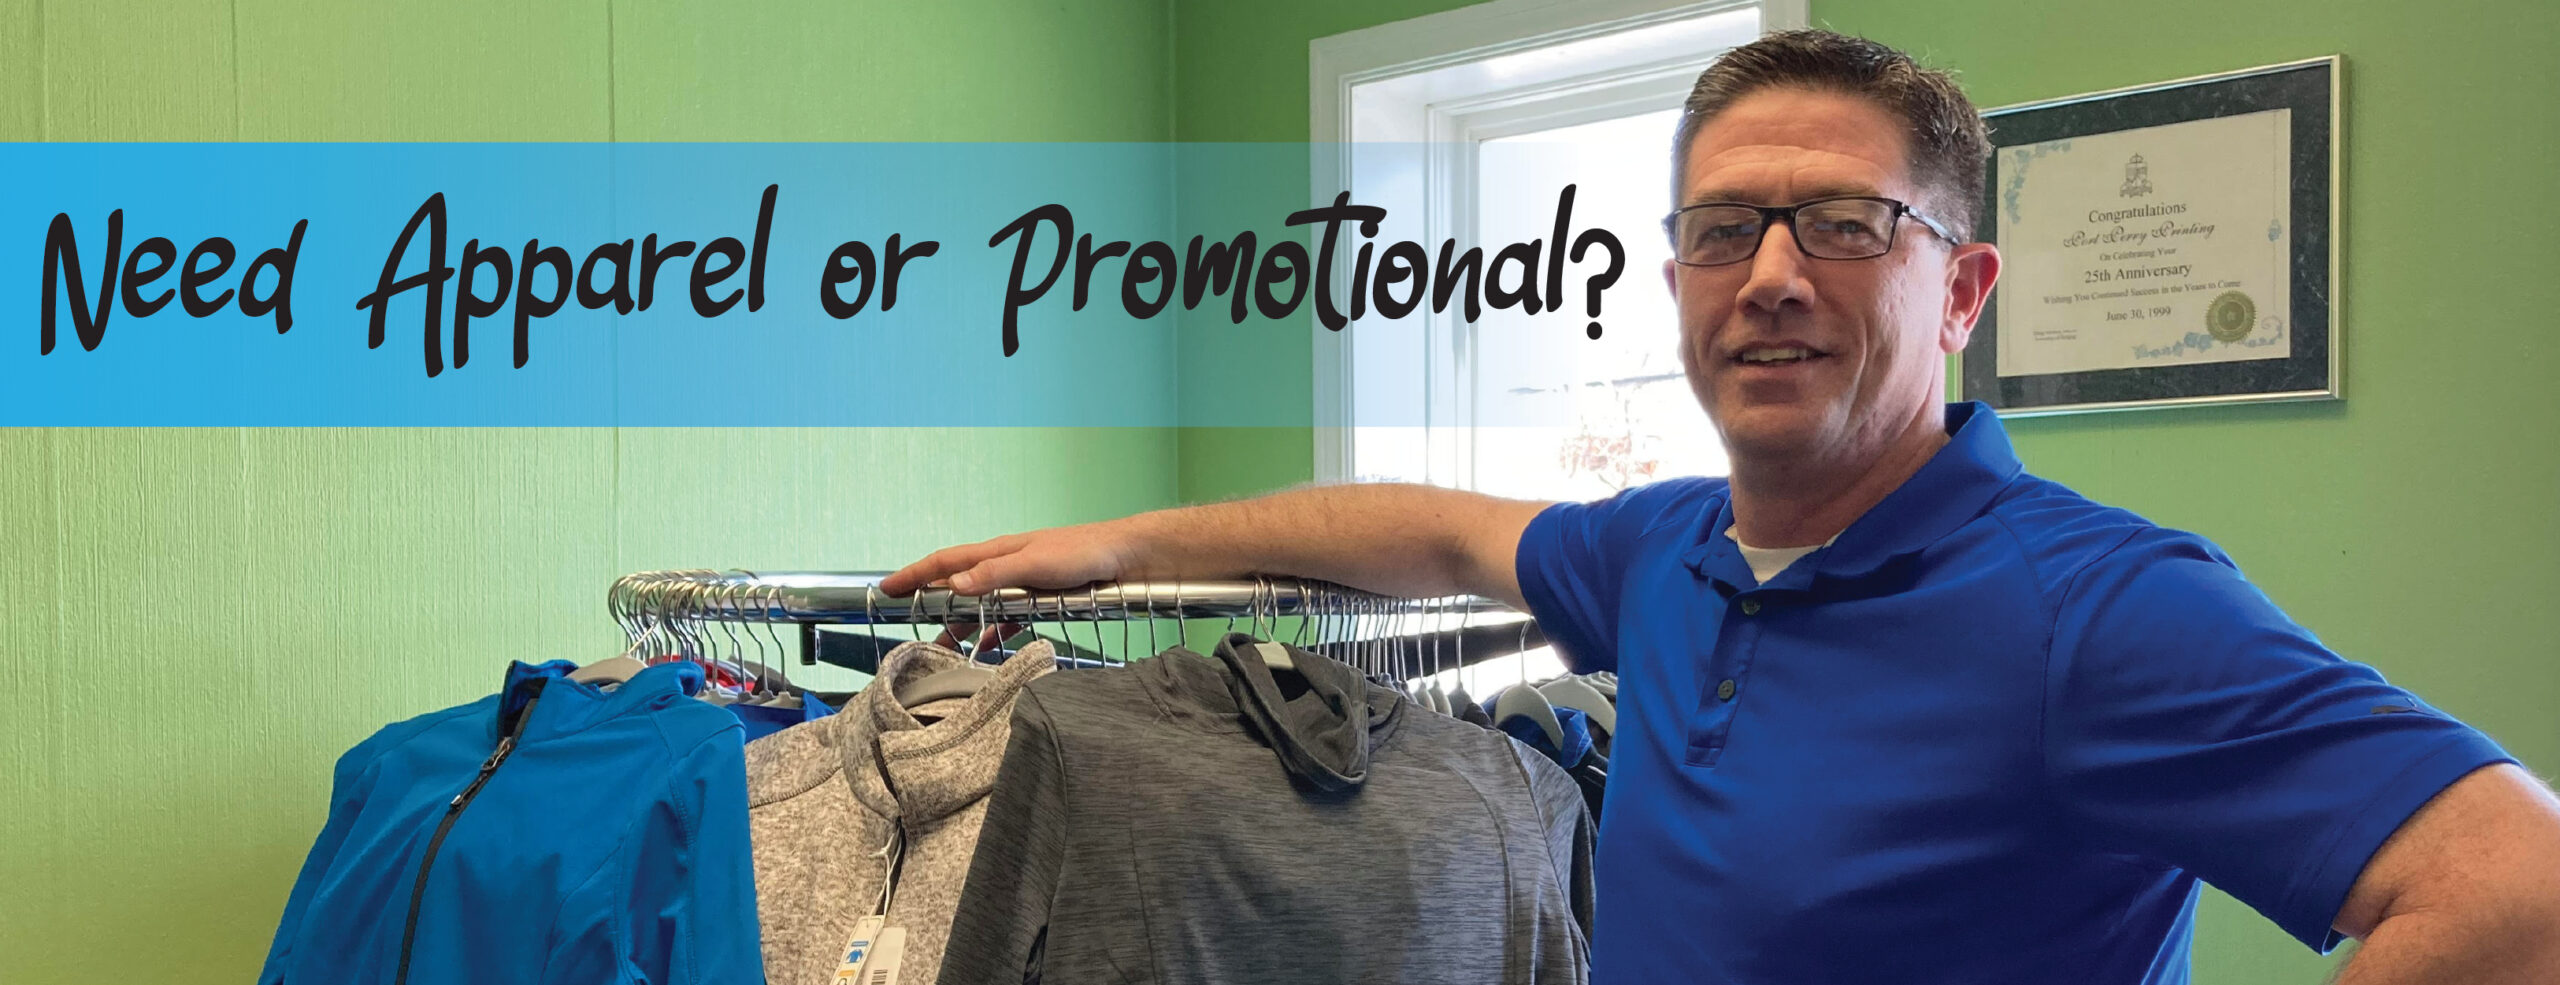 Contact Patrick for your Apparel and Promotional needs!